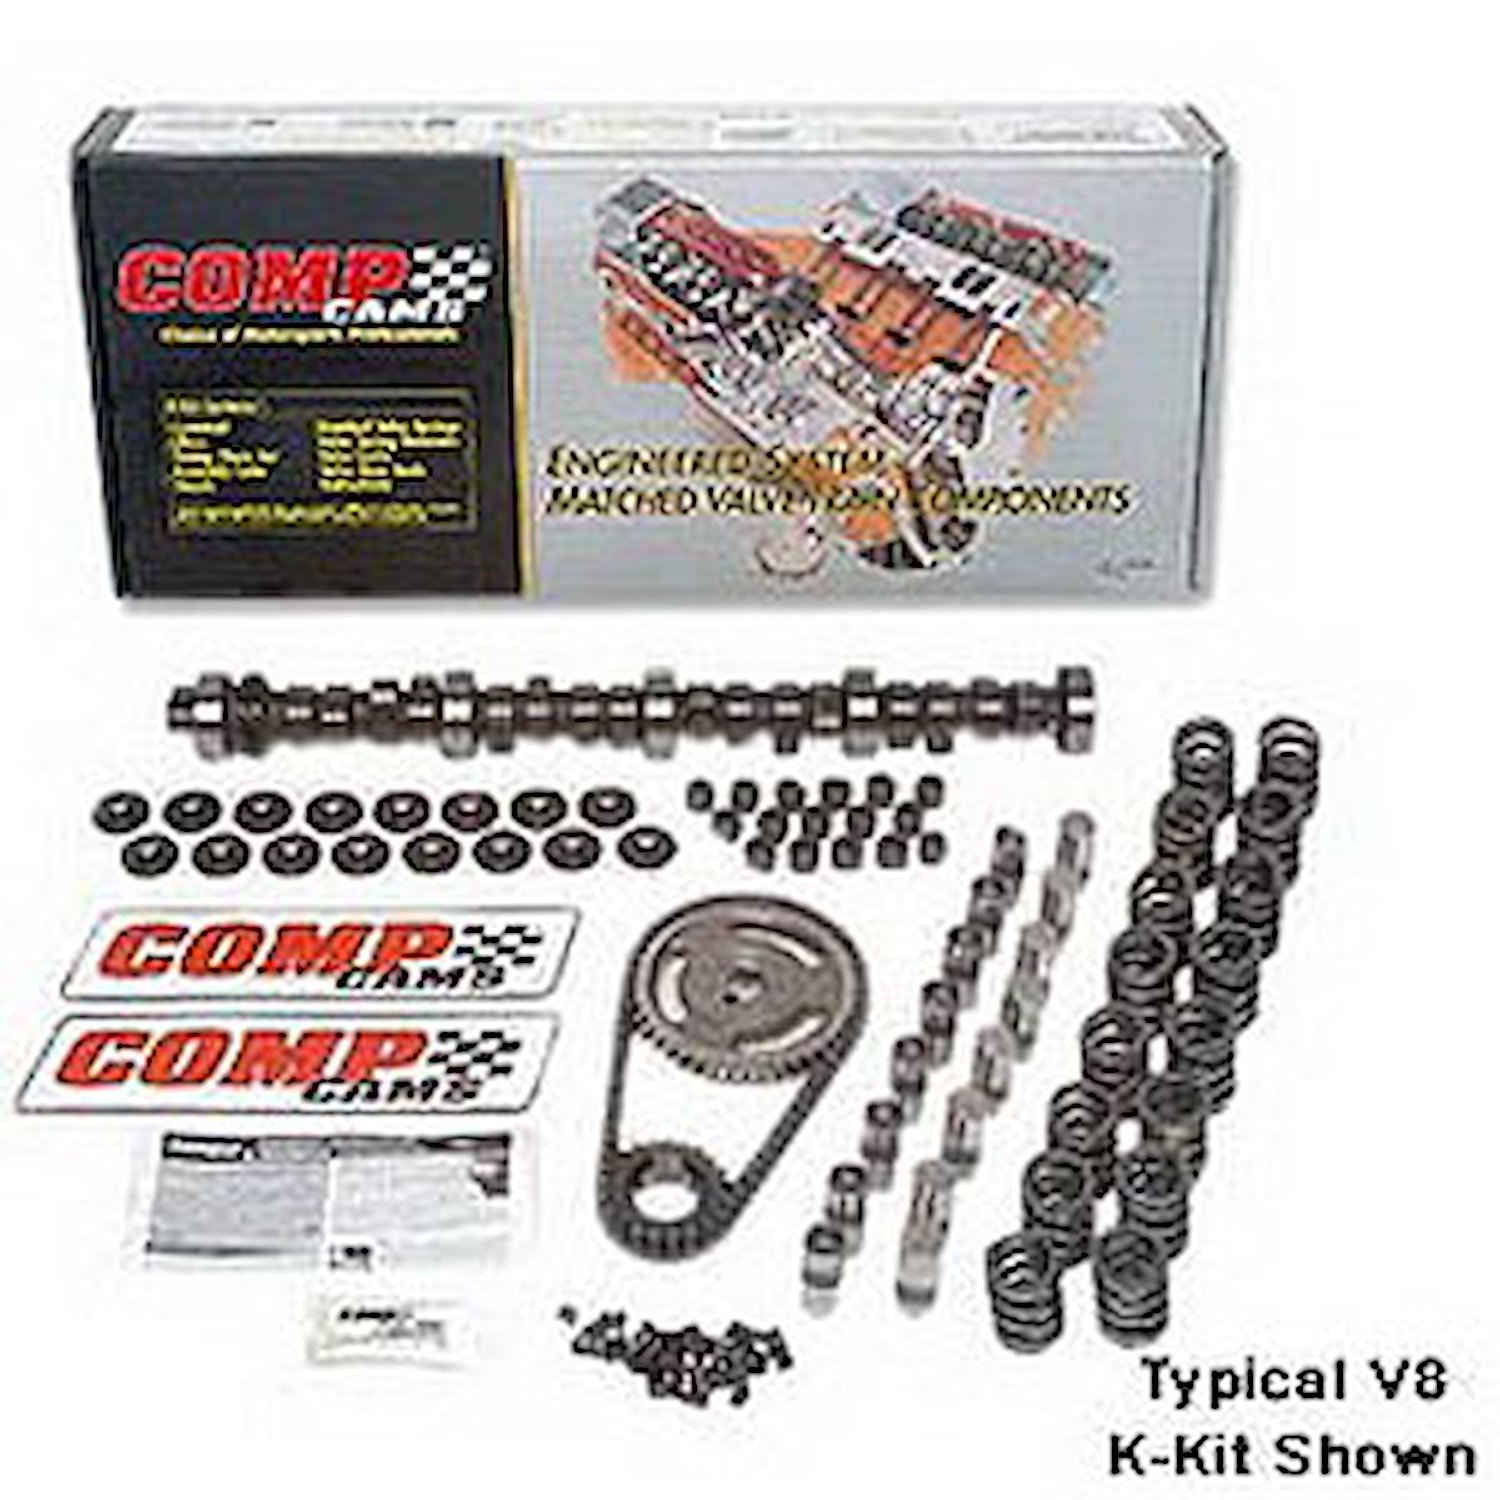 Magnum Hydraulic Roller Camshaft Complete Kit Chevy 4.3L V6 1980-97 Lift: .500"/.510"